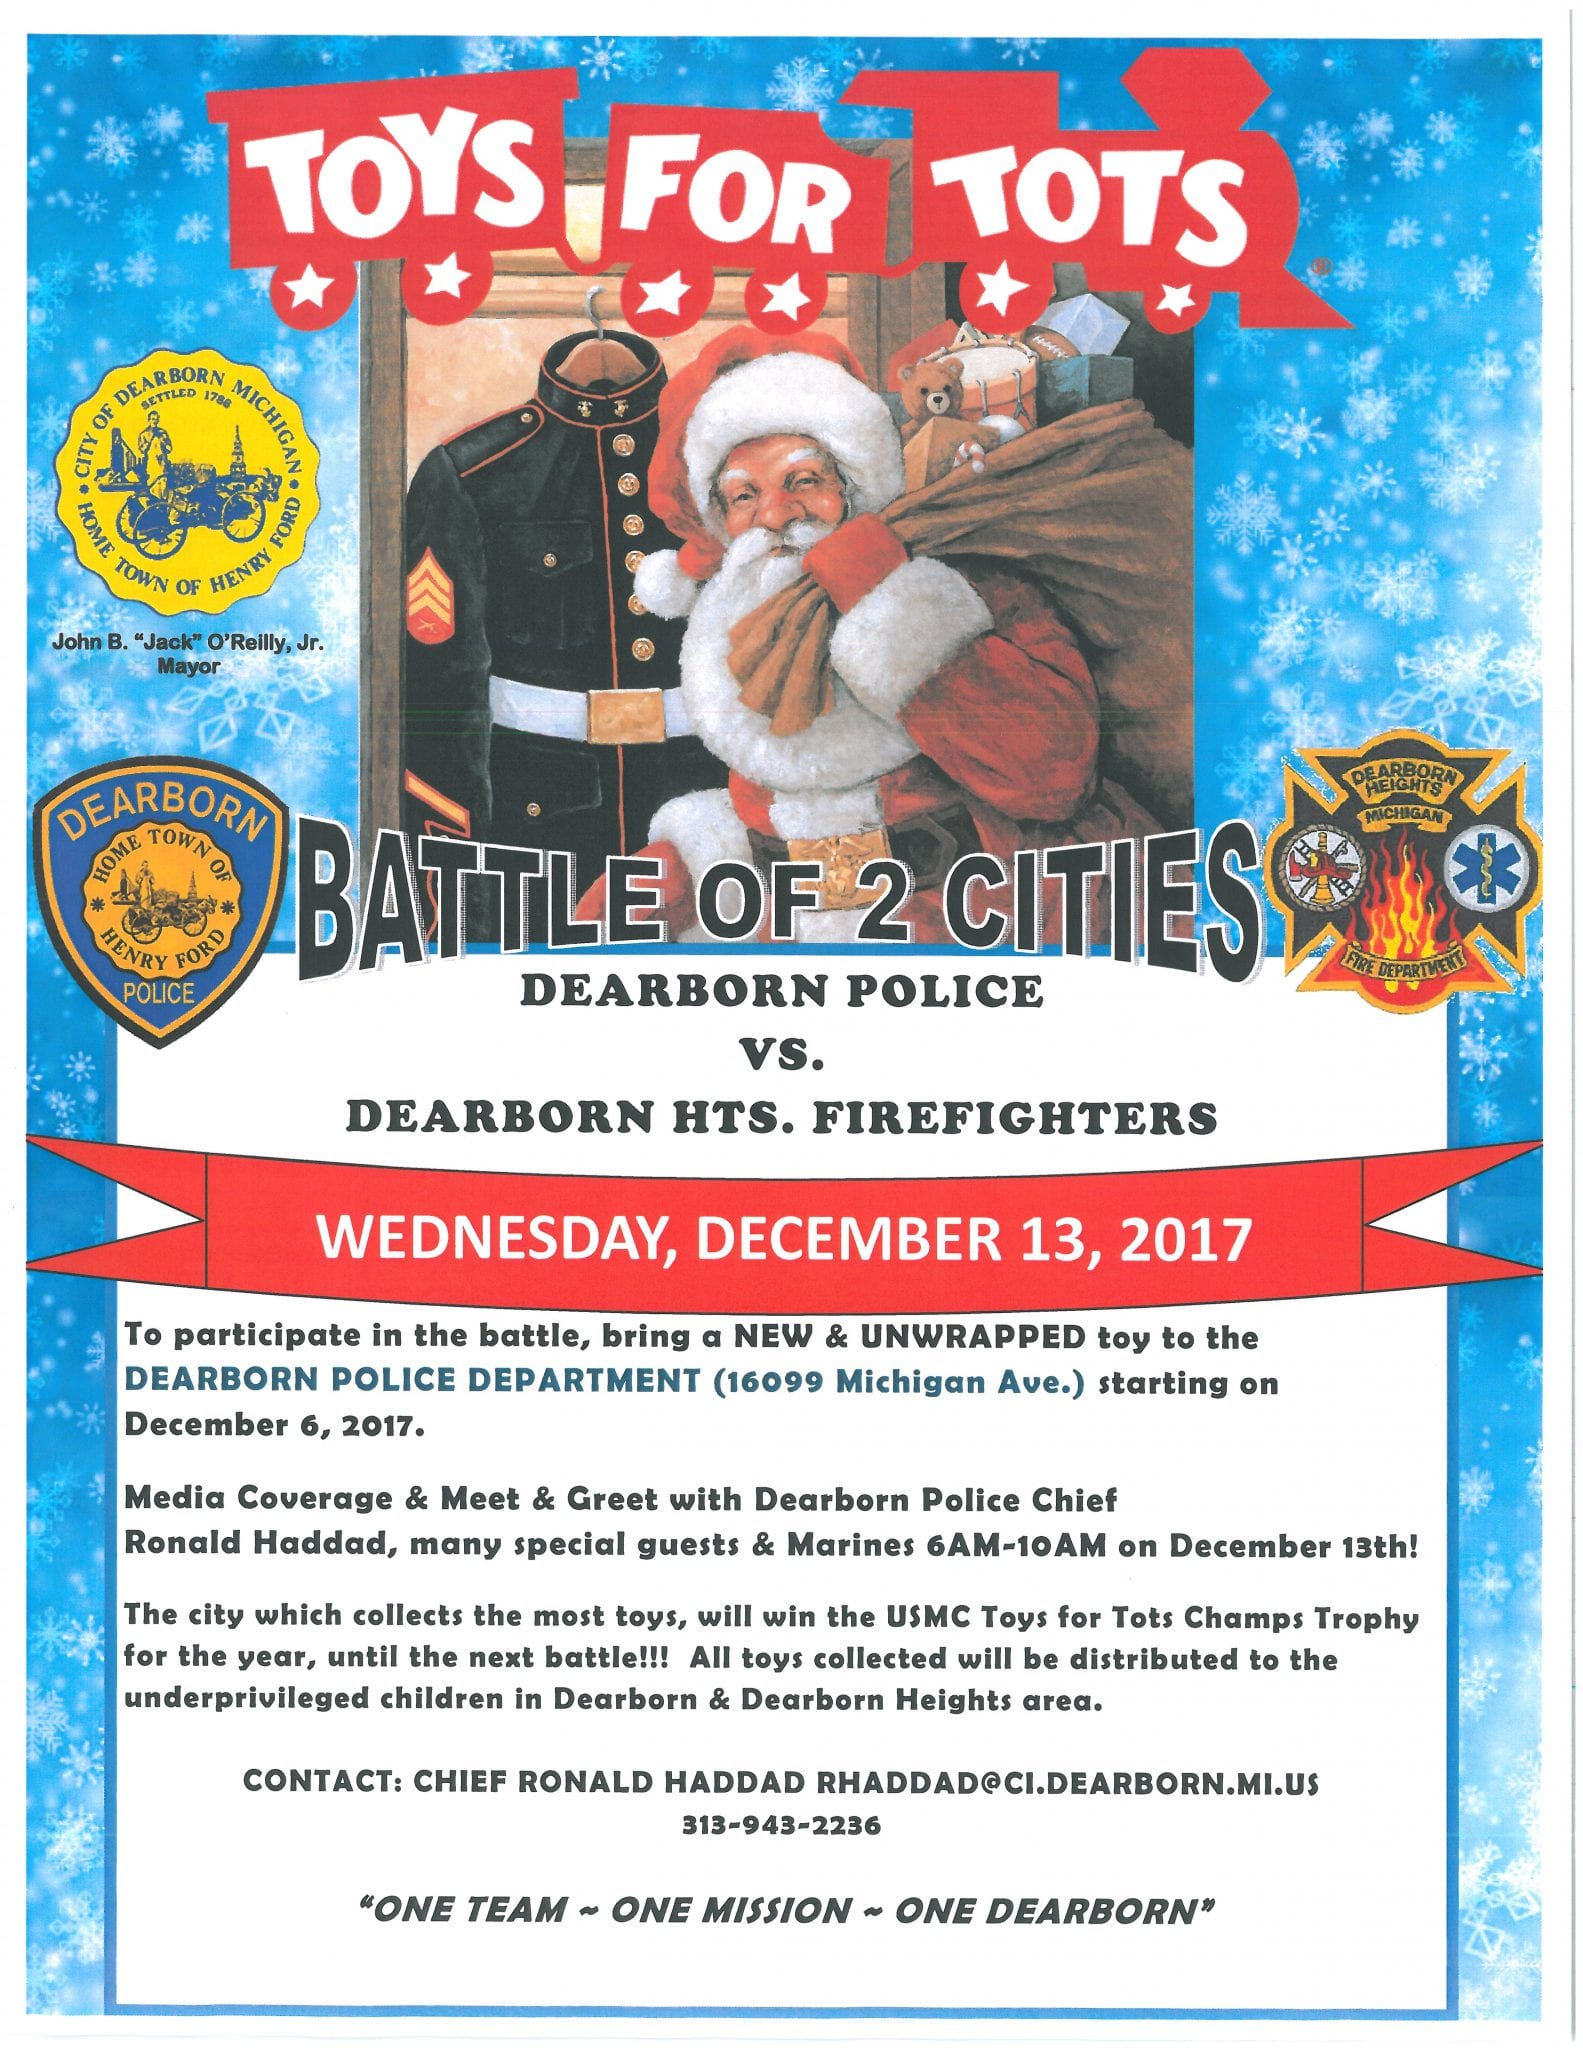 Dearborn Polic Needs you help in Toys for tots Battle